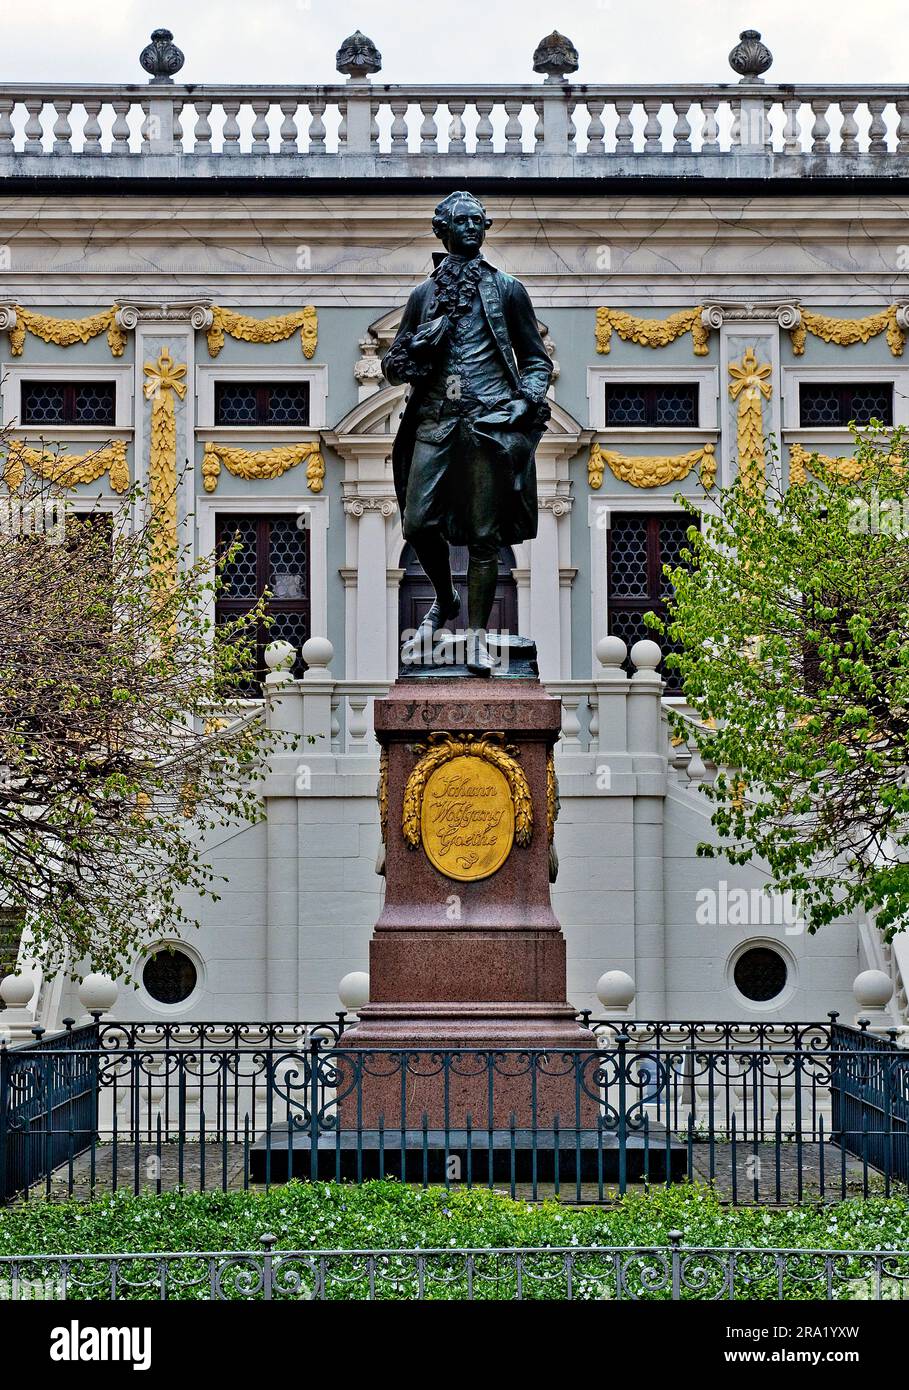 Bronze statue of Goethe on the Naschmarkt in front of the Old Stock Exchange, Germany, Saxony, Leipzig Stock Photo